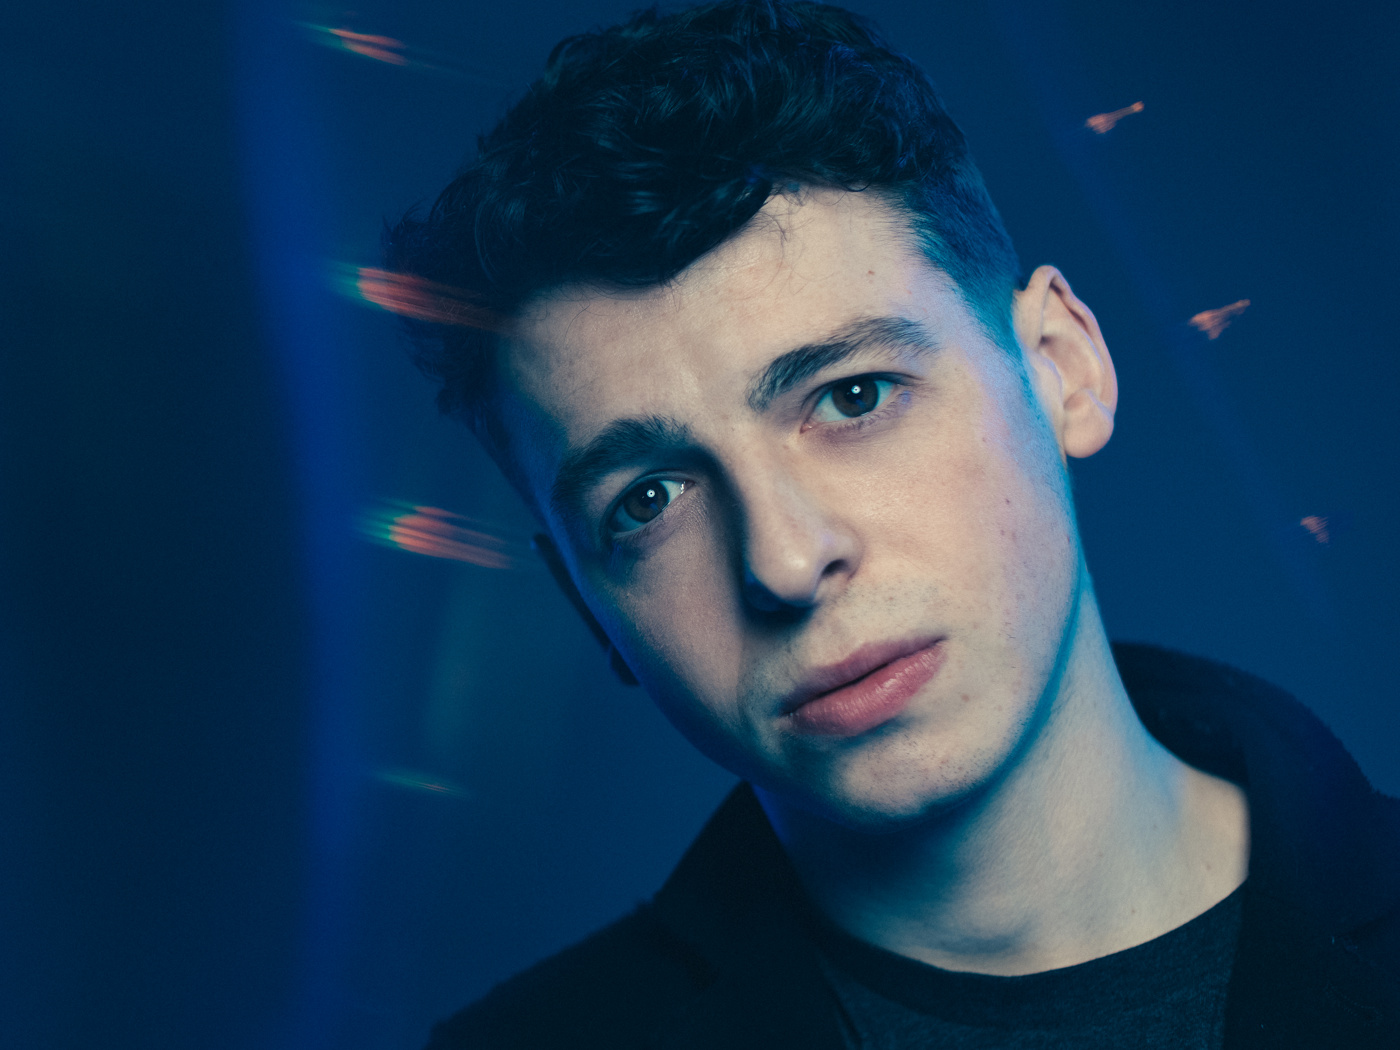 Anthony Boyle for Broadway.com